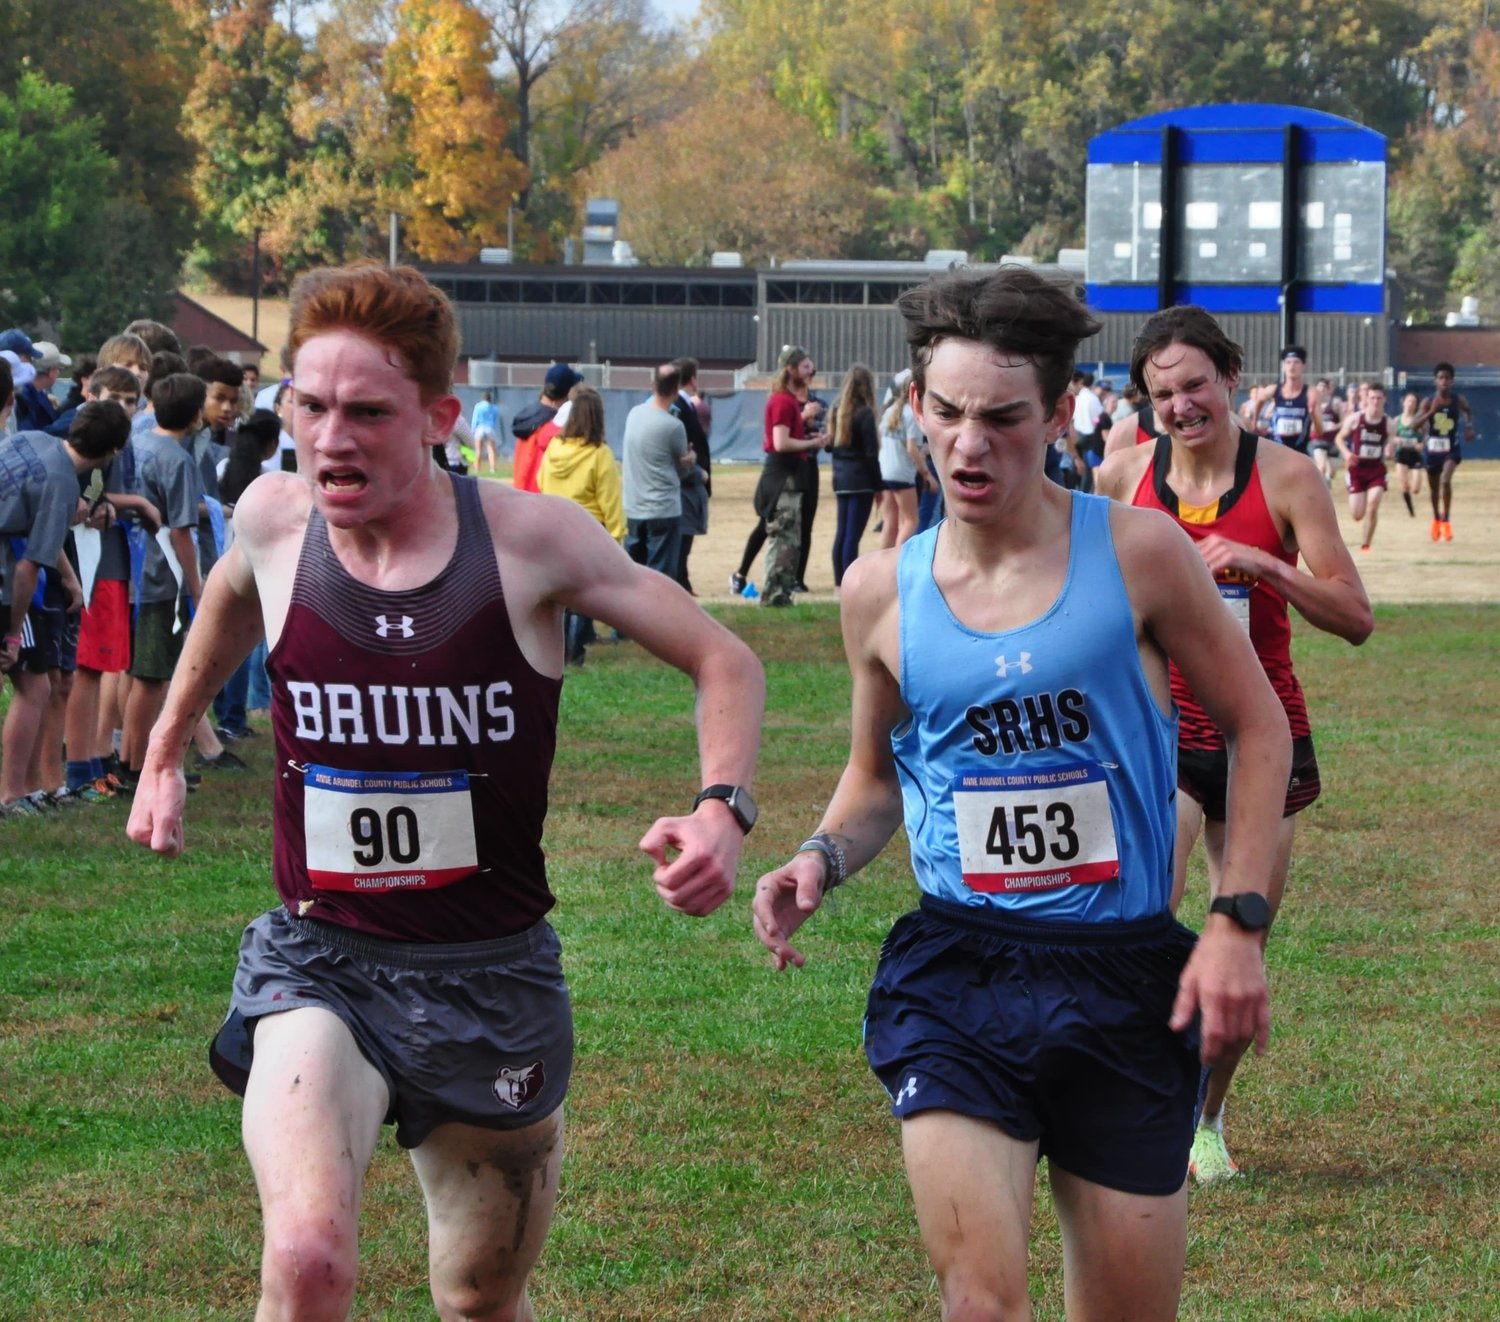 Broadneck High School senior Ben Sterner (left) bested South River High School senior Cole Ford by a tenth of a second at the county cross country championships at South River High School in Edgewater on October 26. Sterner and Ford finished in 26th and 27th place, respectively.